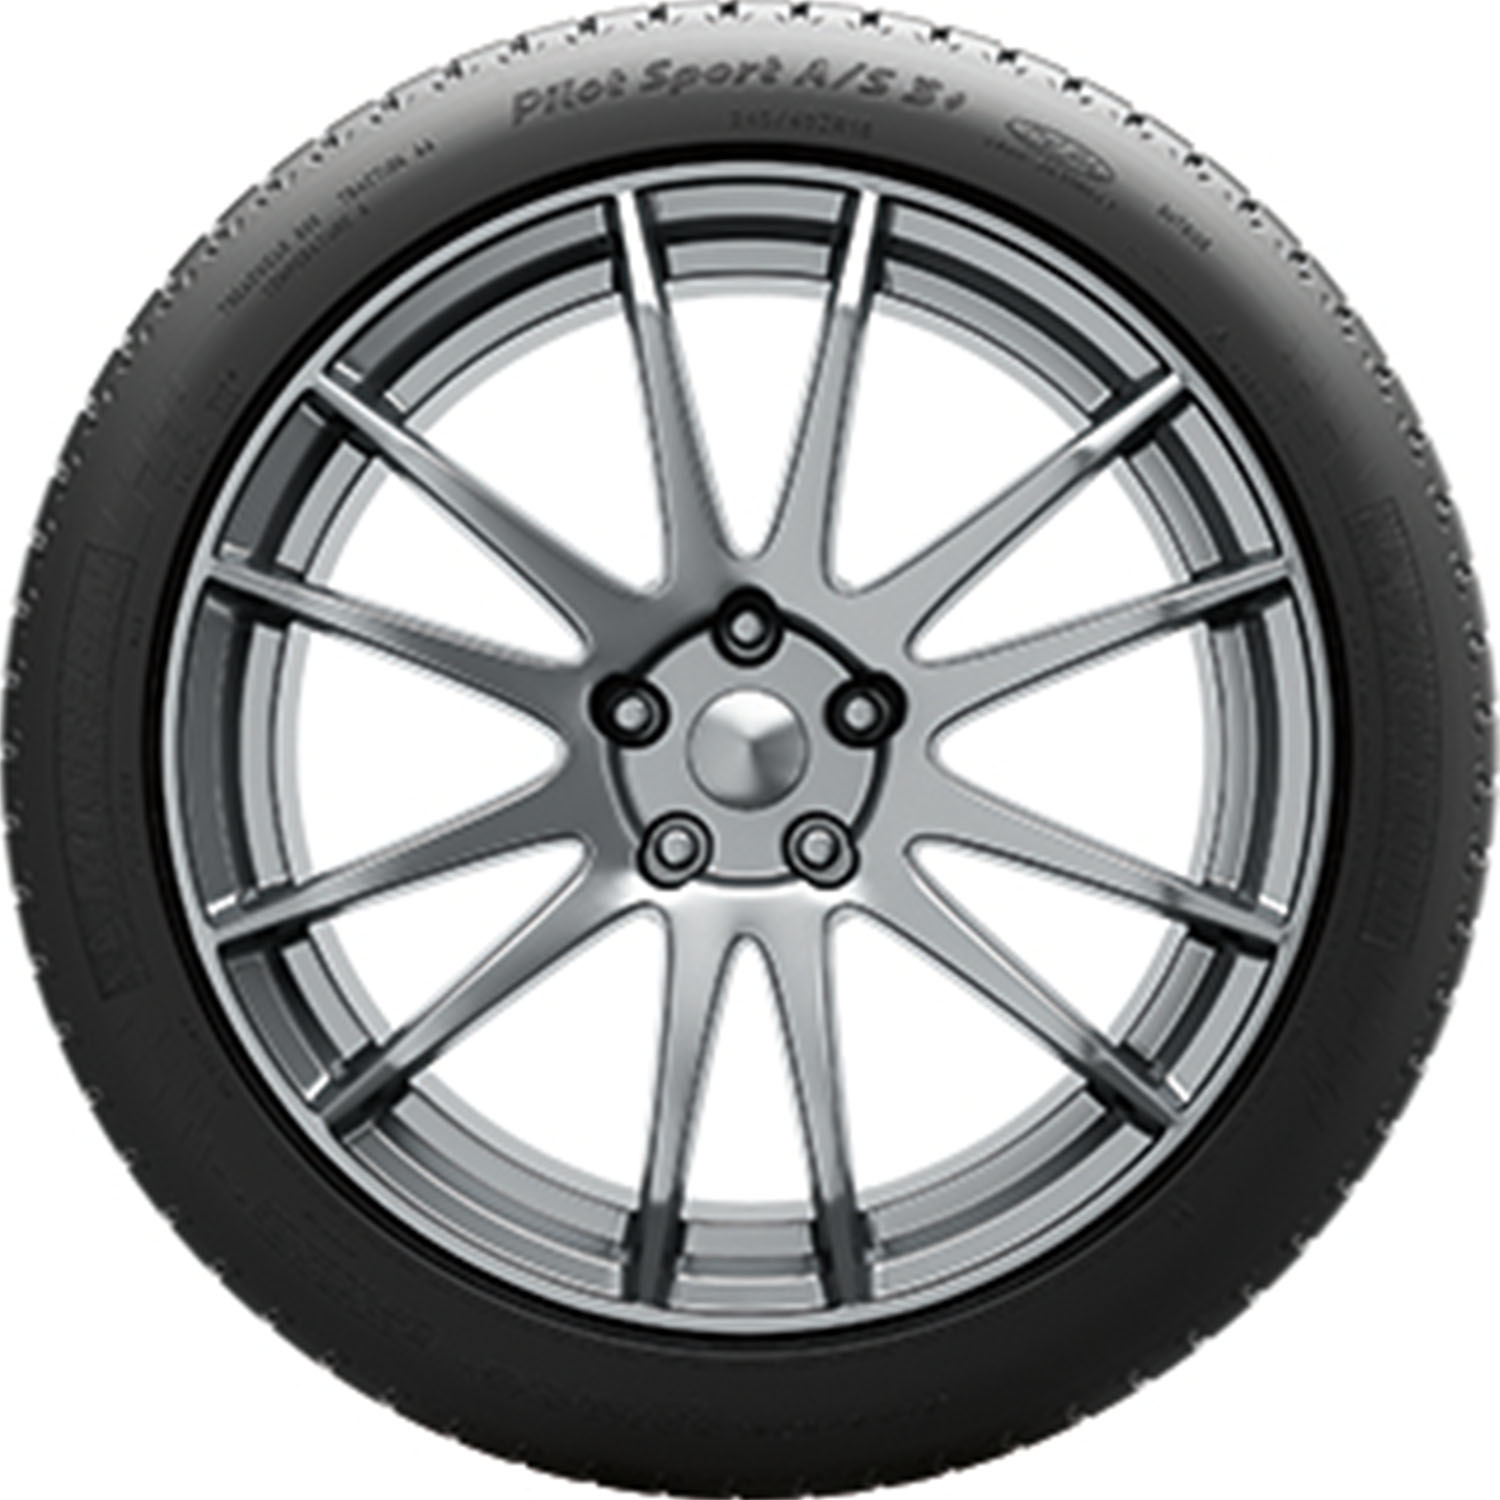 Michelin Pilot Sport A/S 3+ UHP All Season 235/55ZR19 105Y XL Passenger Tire - image 2 of 4